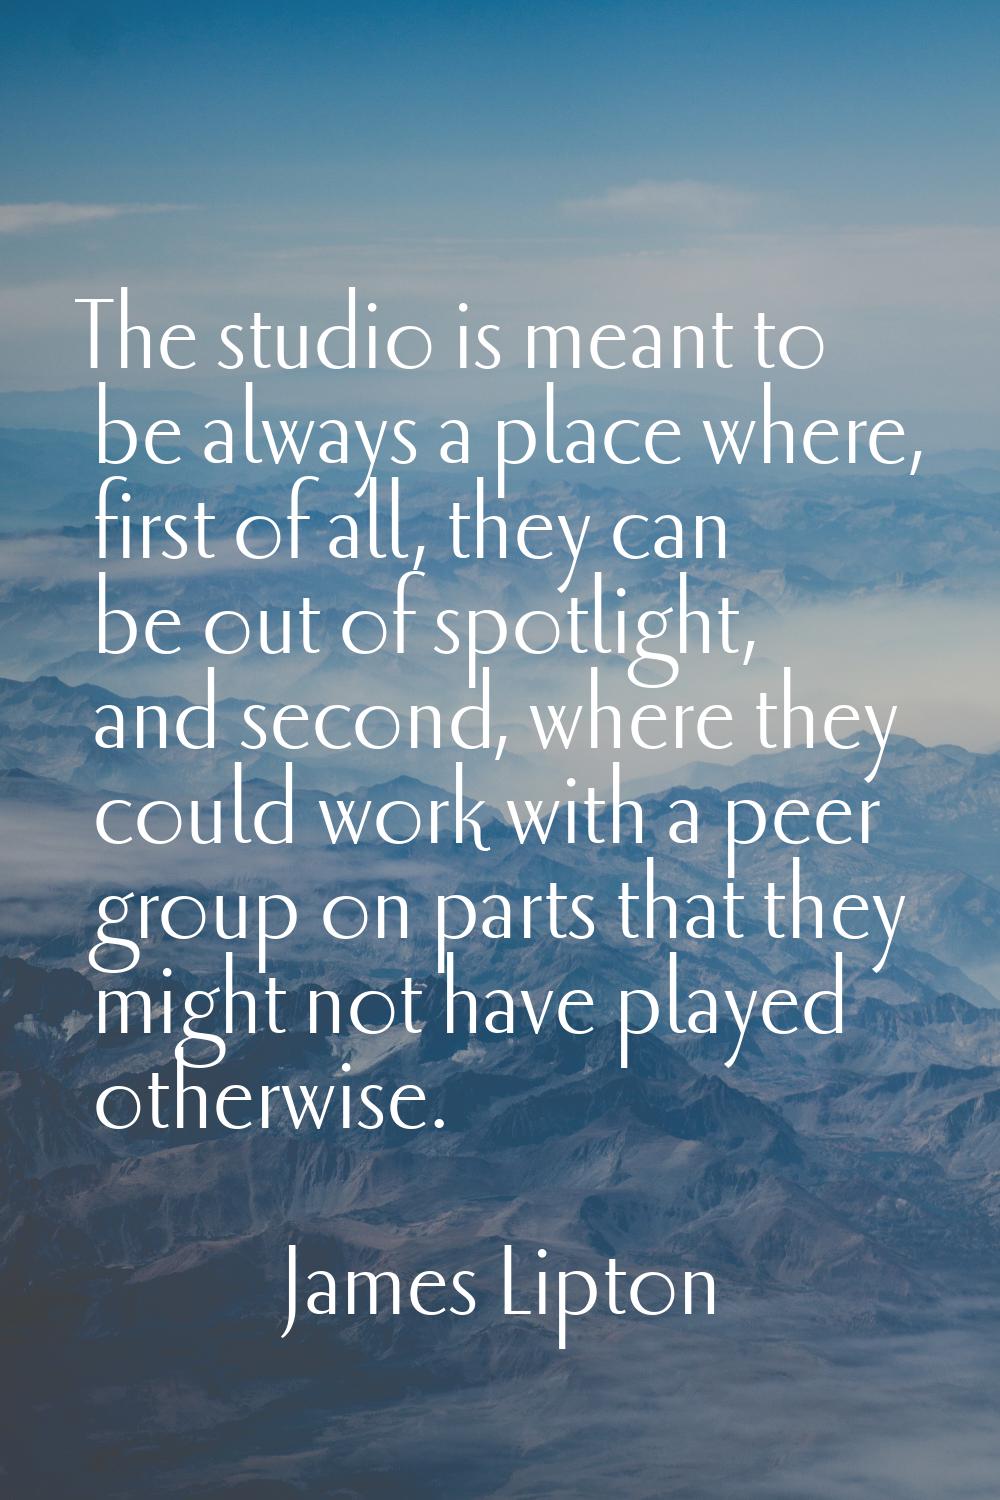 The studio is meant to be always a place where, first of all, they can be out of spotlight, and sec